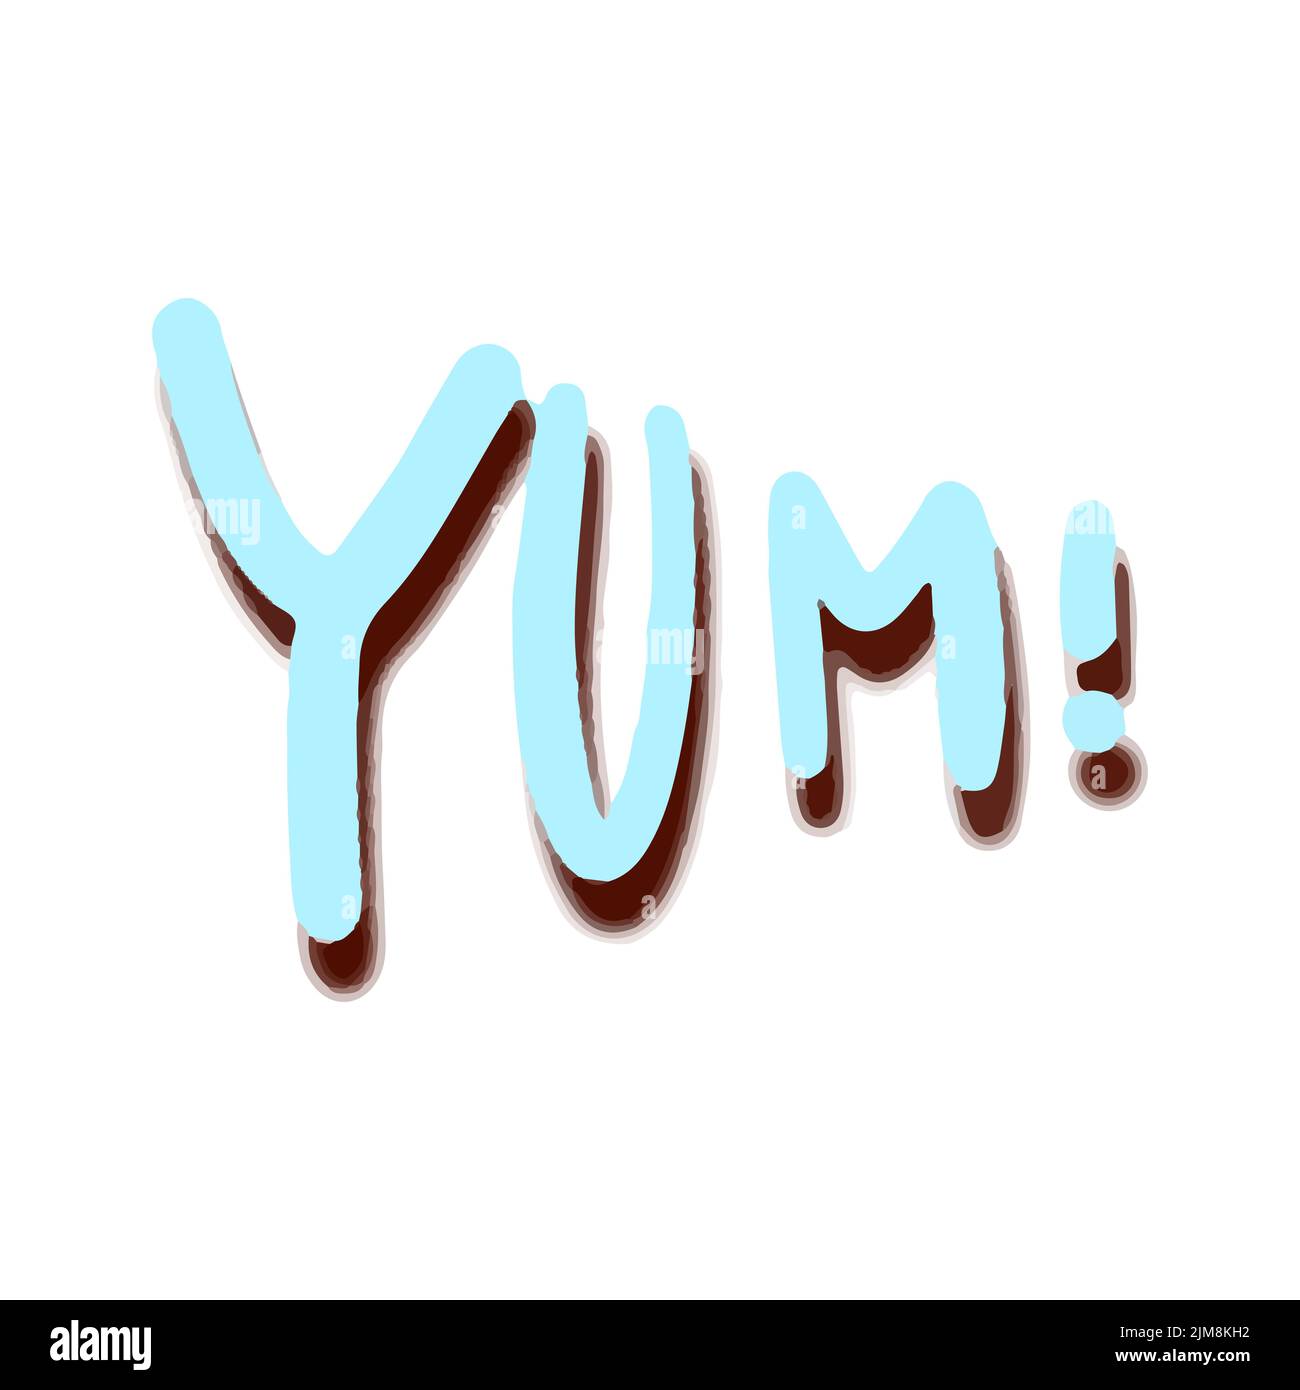 Emoji yum Cut Out Stock Images & Pictures - Alamy